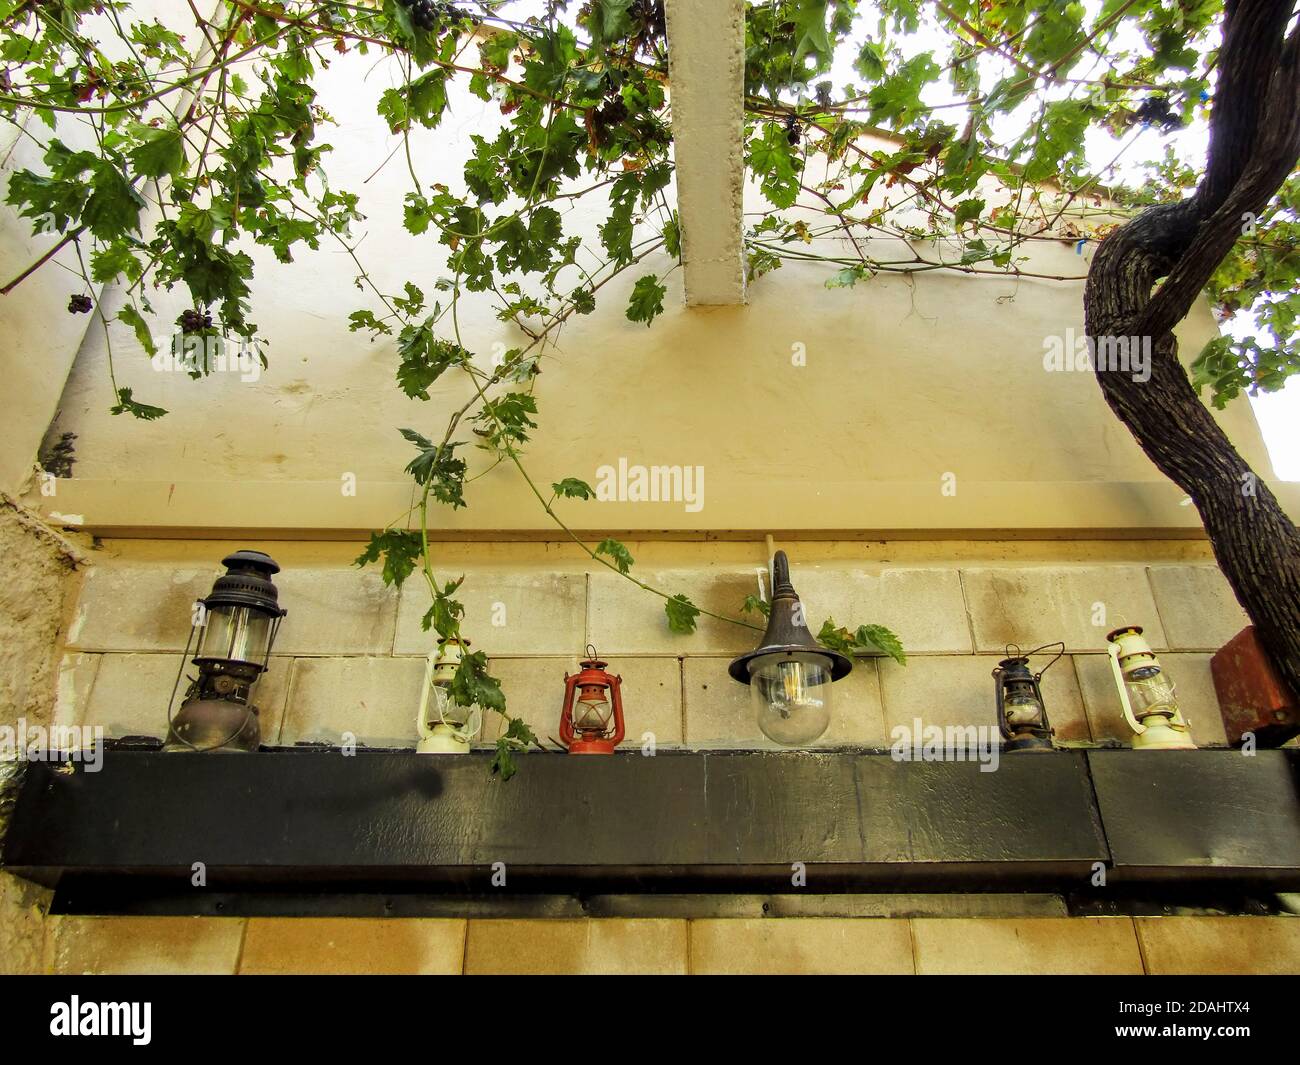 Greece Old Lamps High Resolution Stock Photography and Images - Alamy